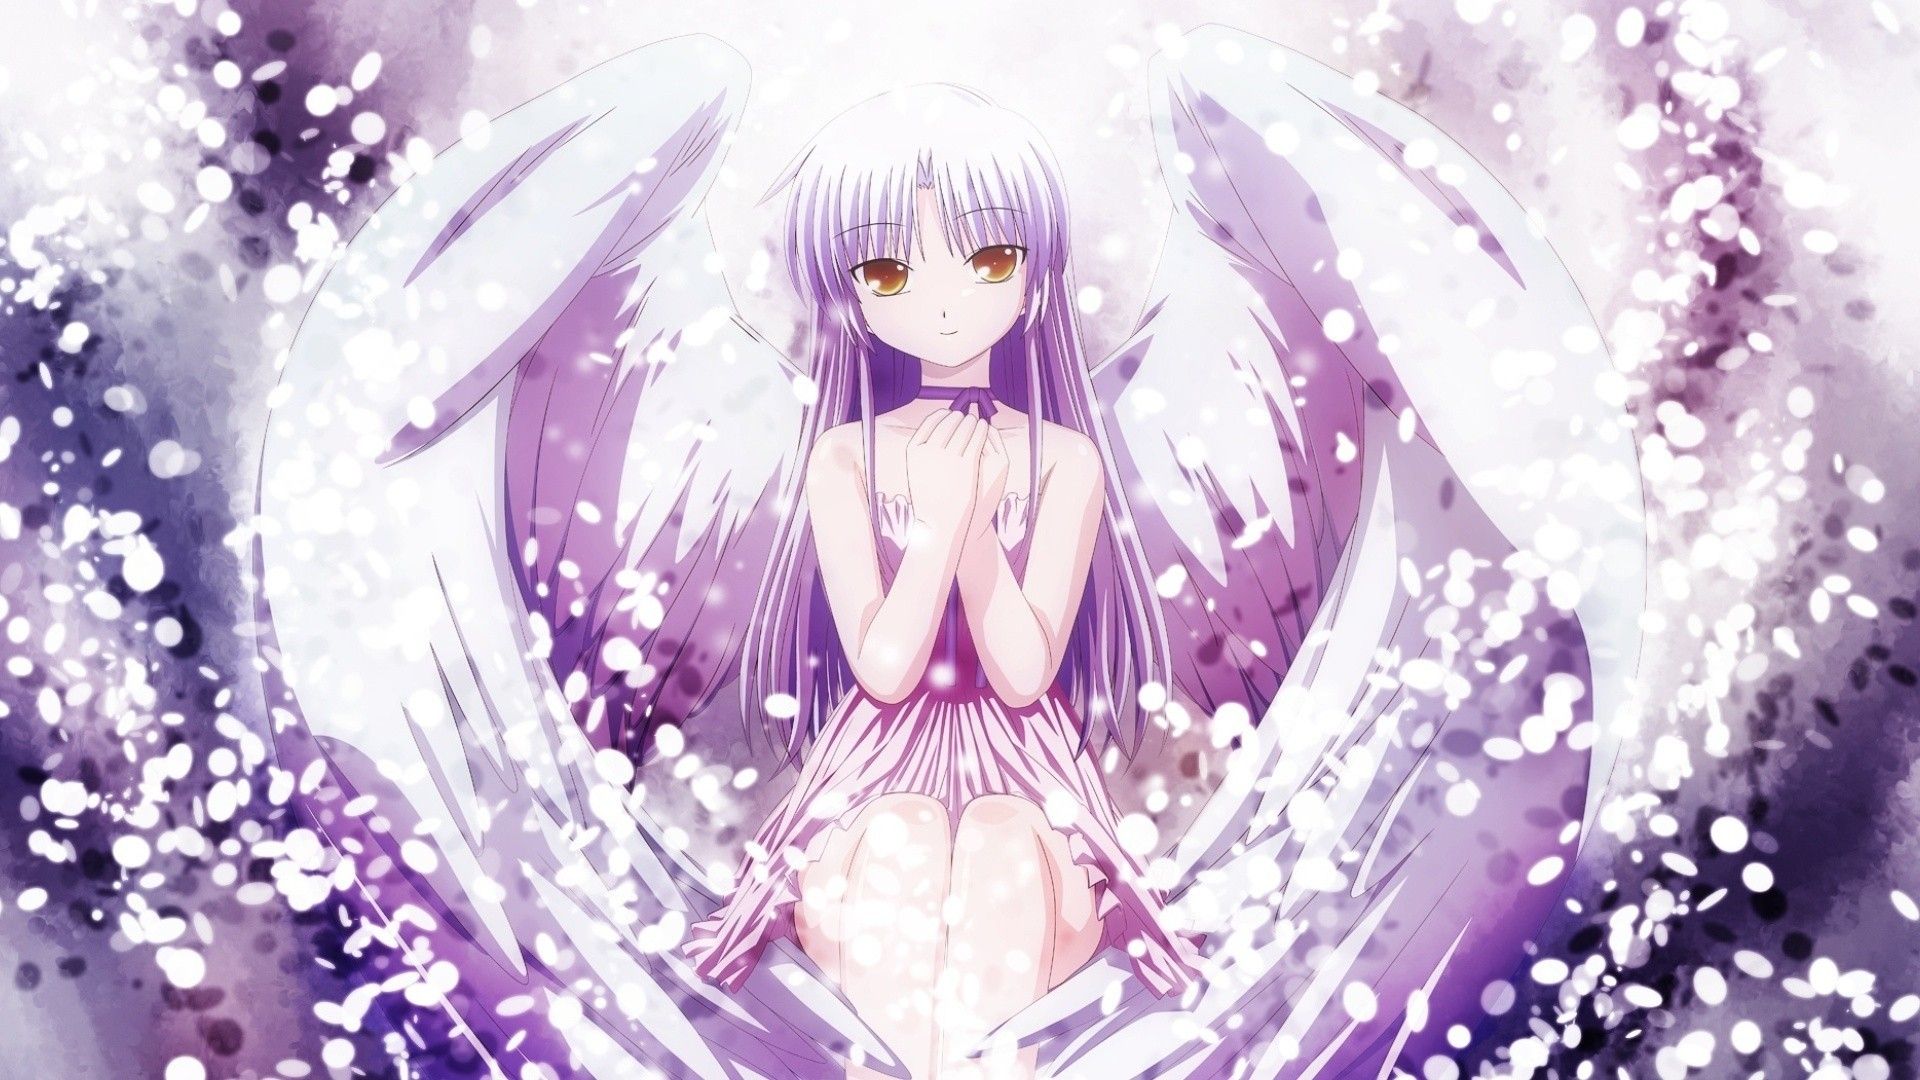 Anime Angels Wallpaper 68 images